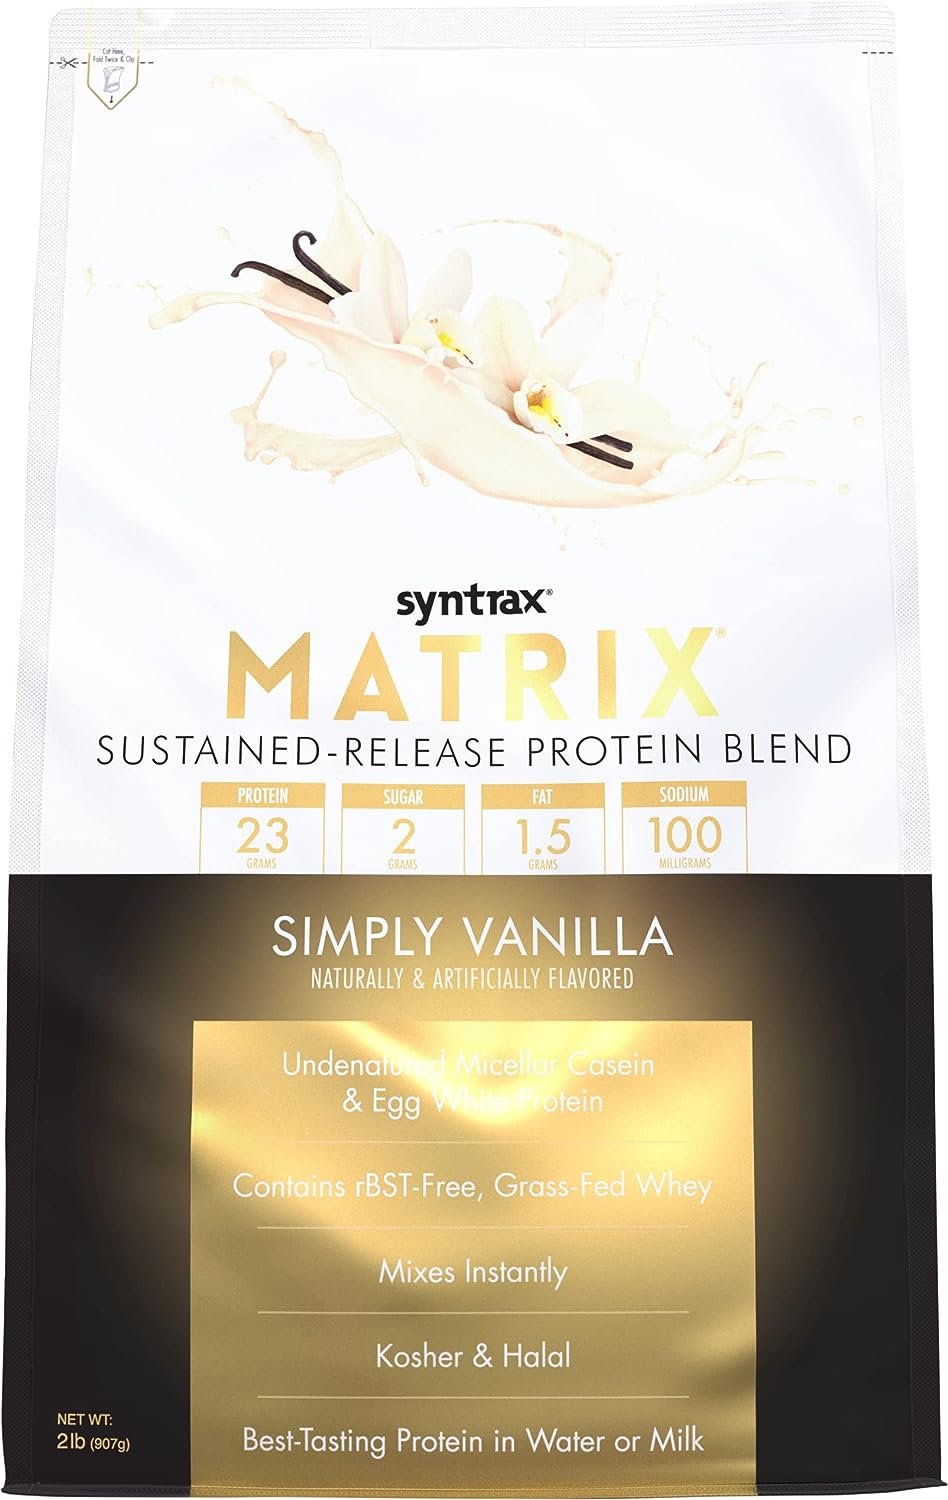 Syntrax Matrix - Sustained-Release Protein Blend Powder - Kosher & Halal - Simply Vanilla (2lb Bag)